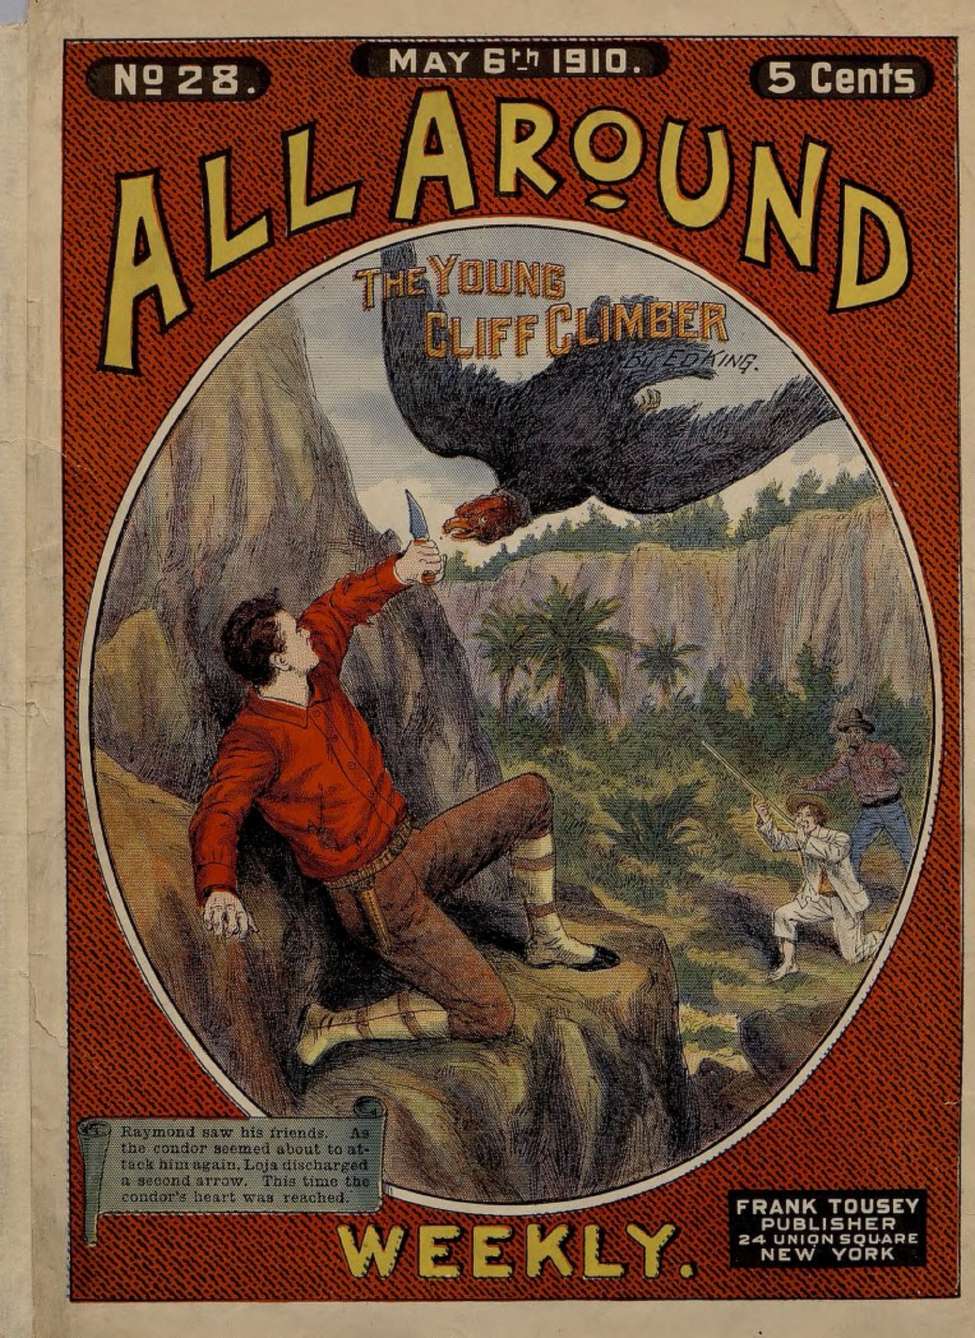 Book Cover For All Around Weekly 28 - The Young Cliff Climber